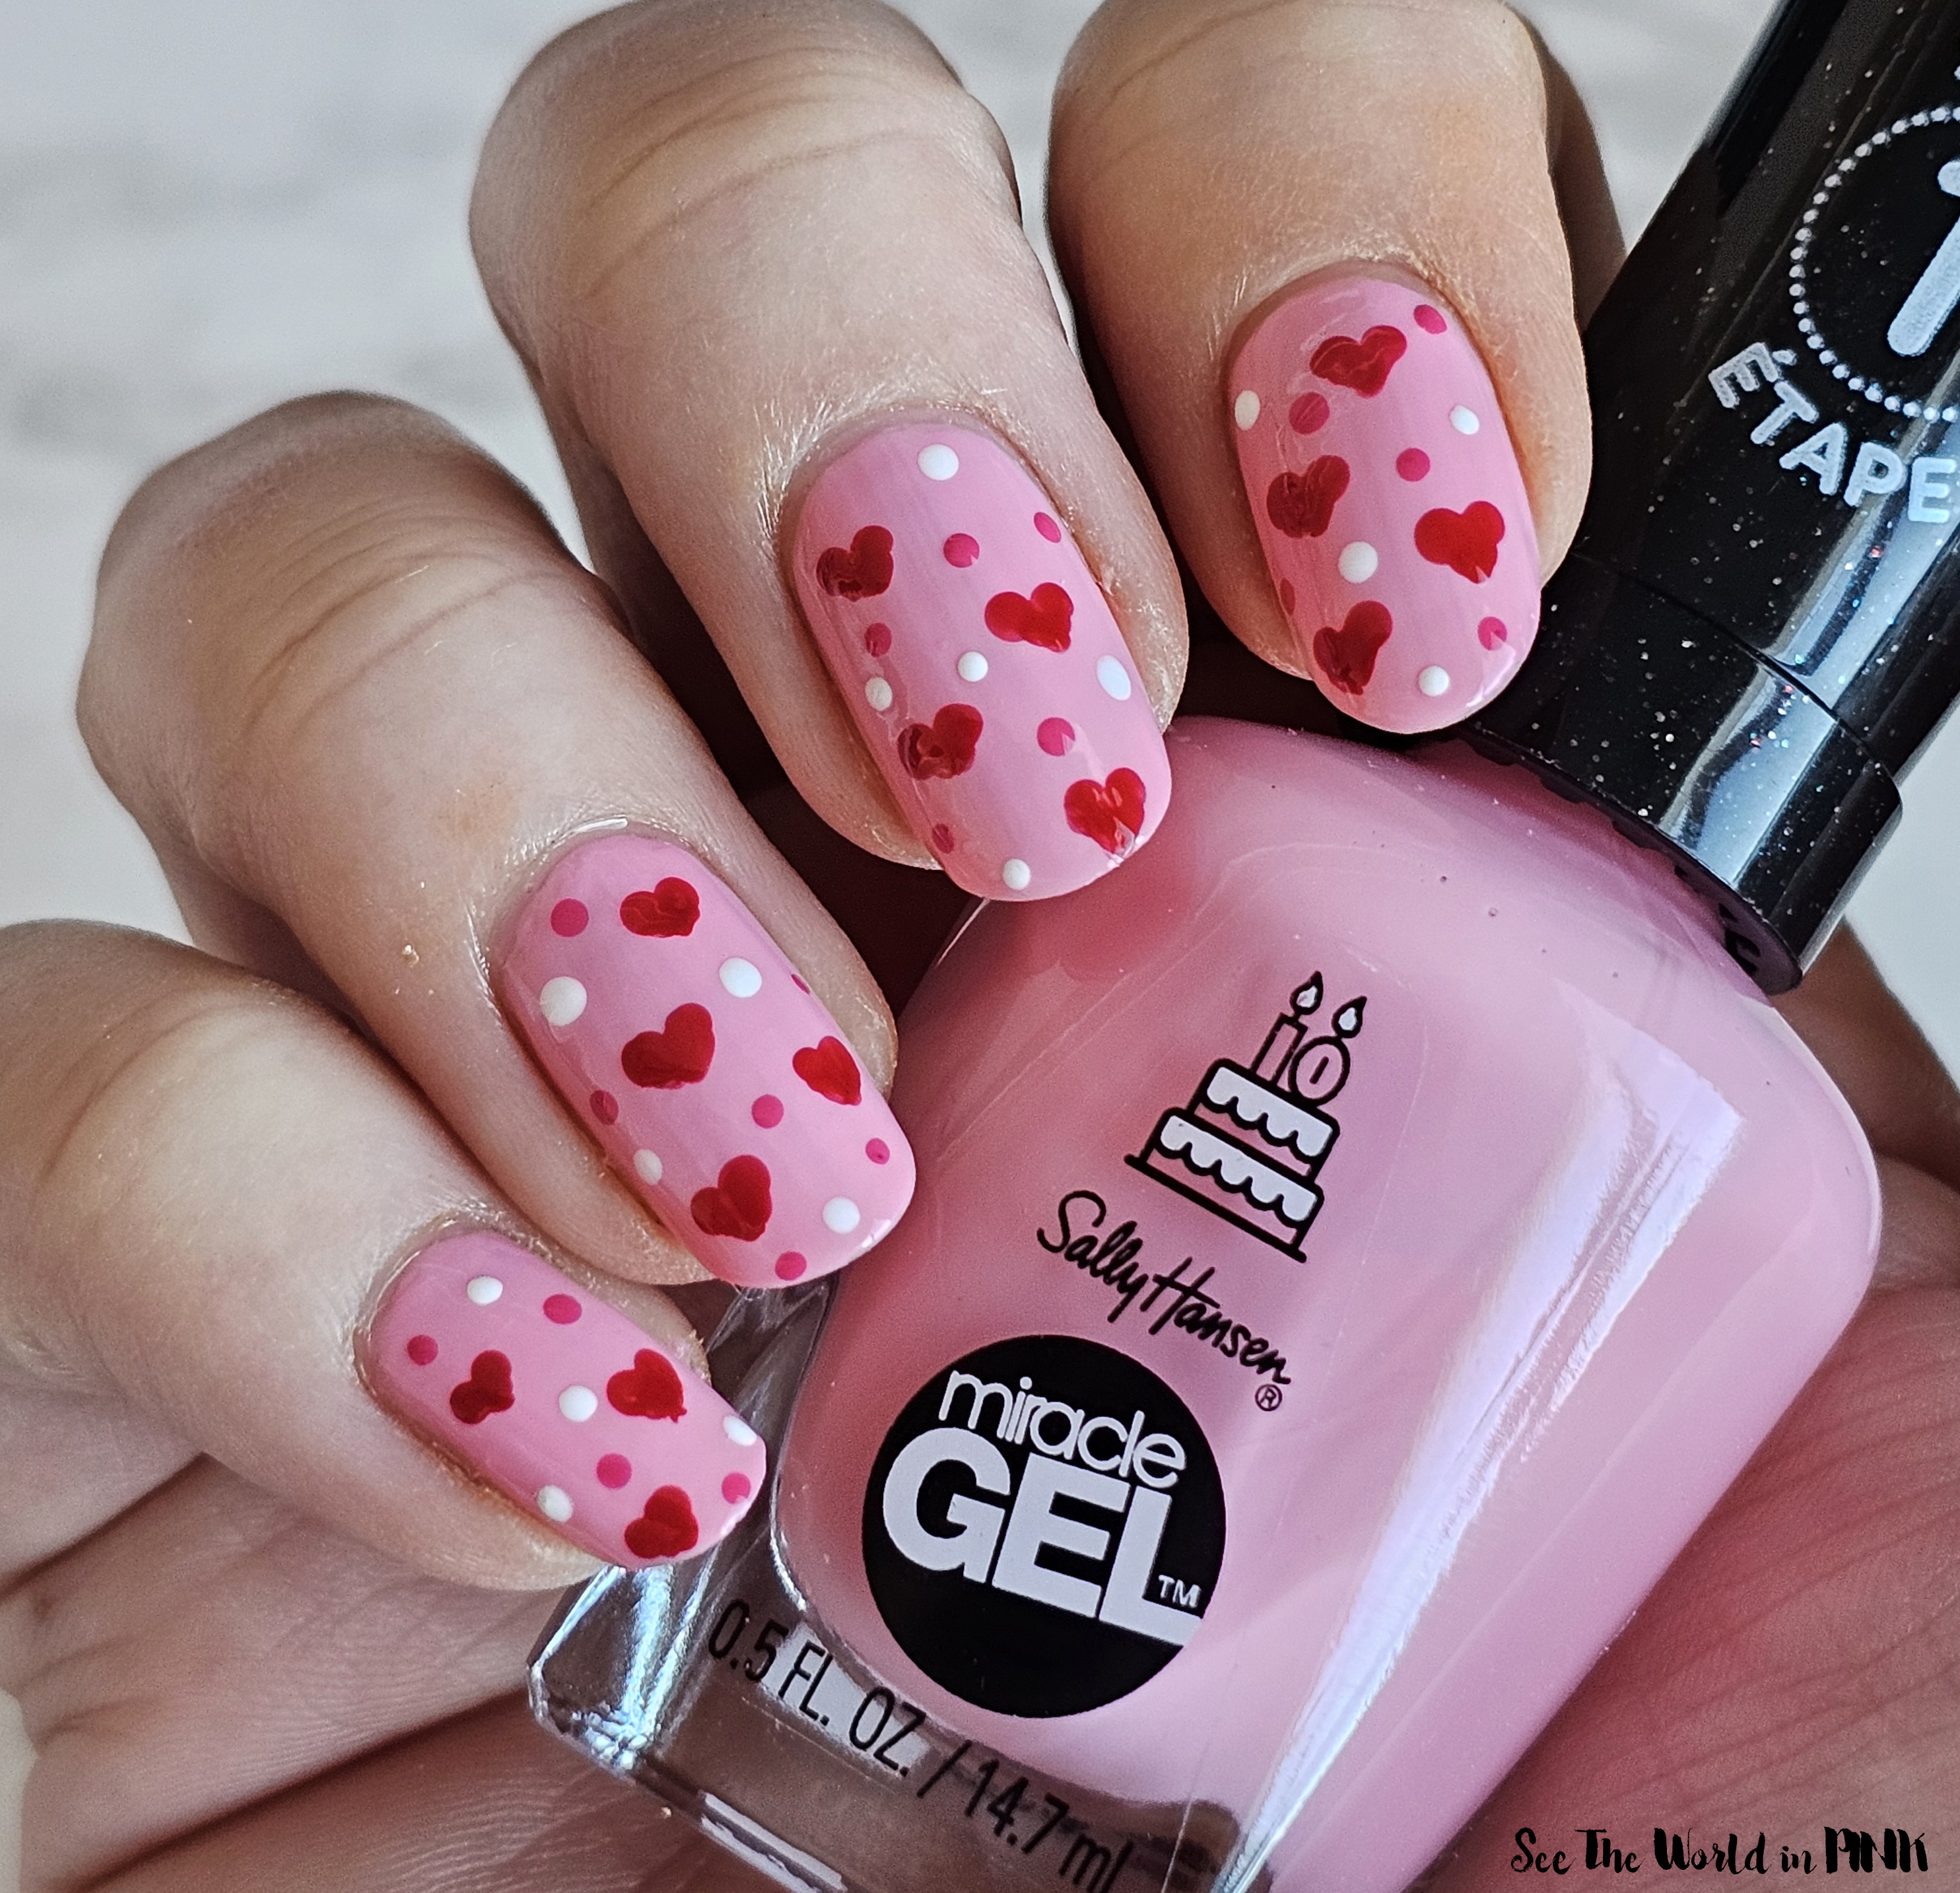 Manicure Monday - Valentine's Day Pink Heart Nails